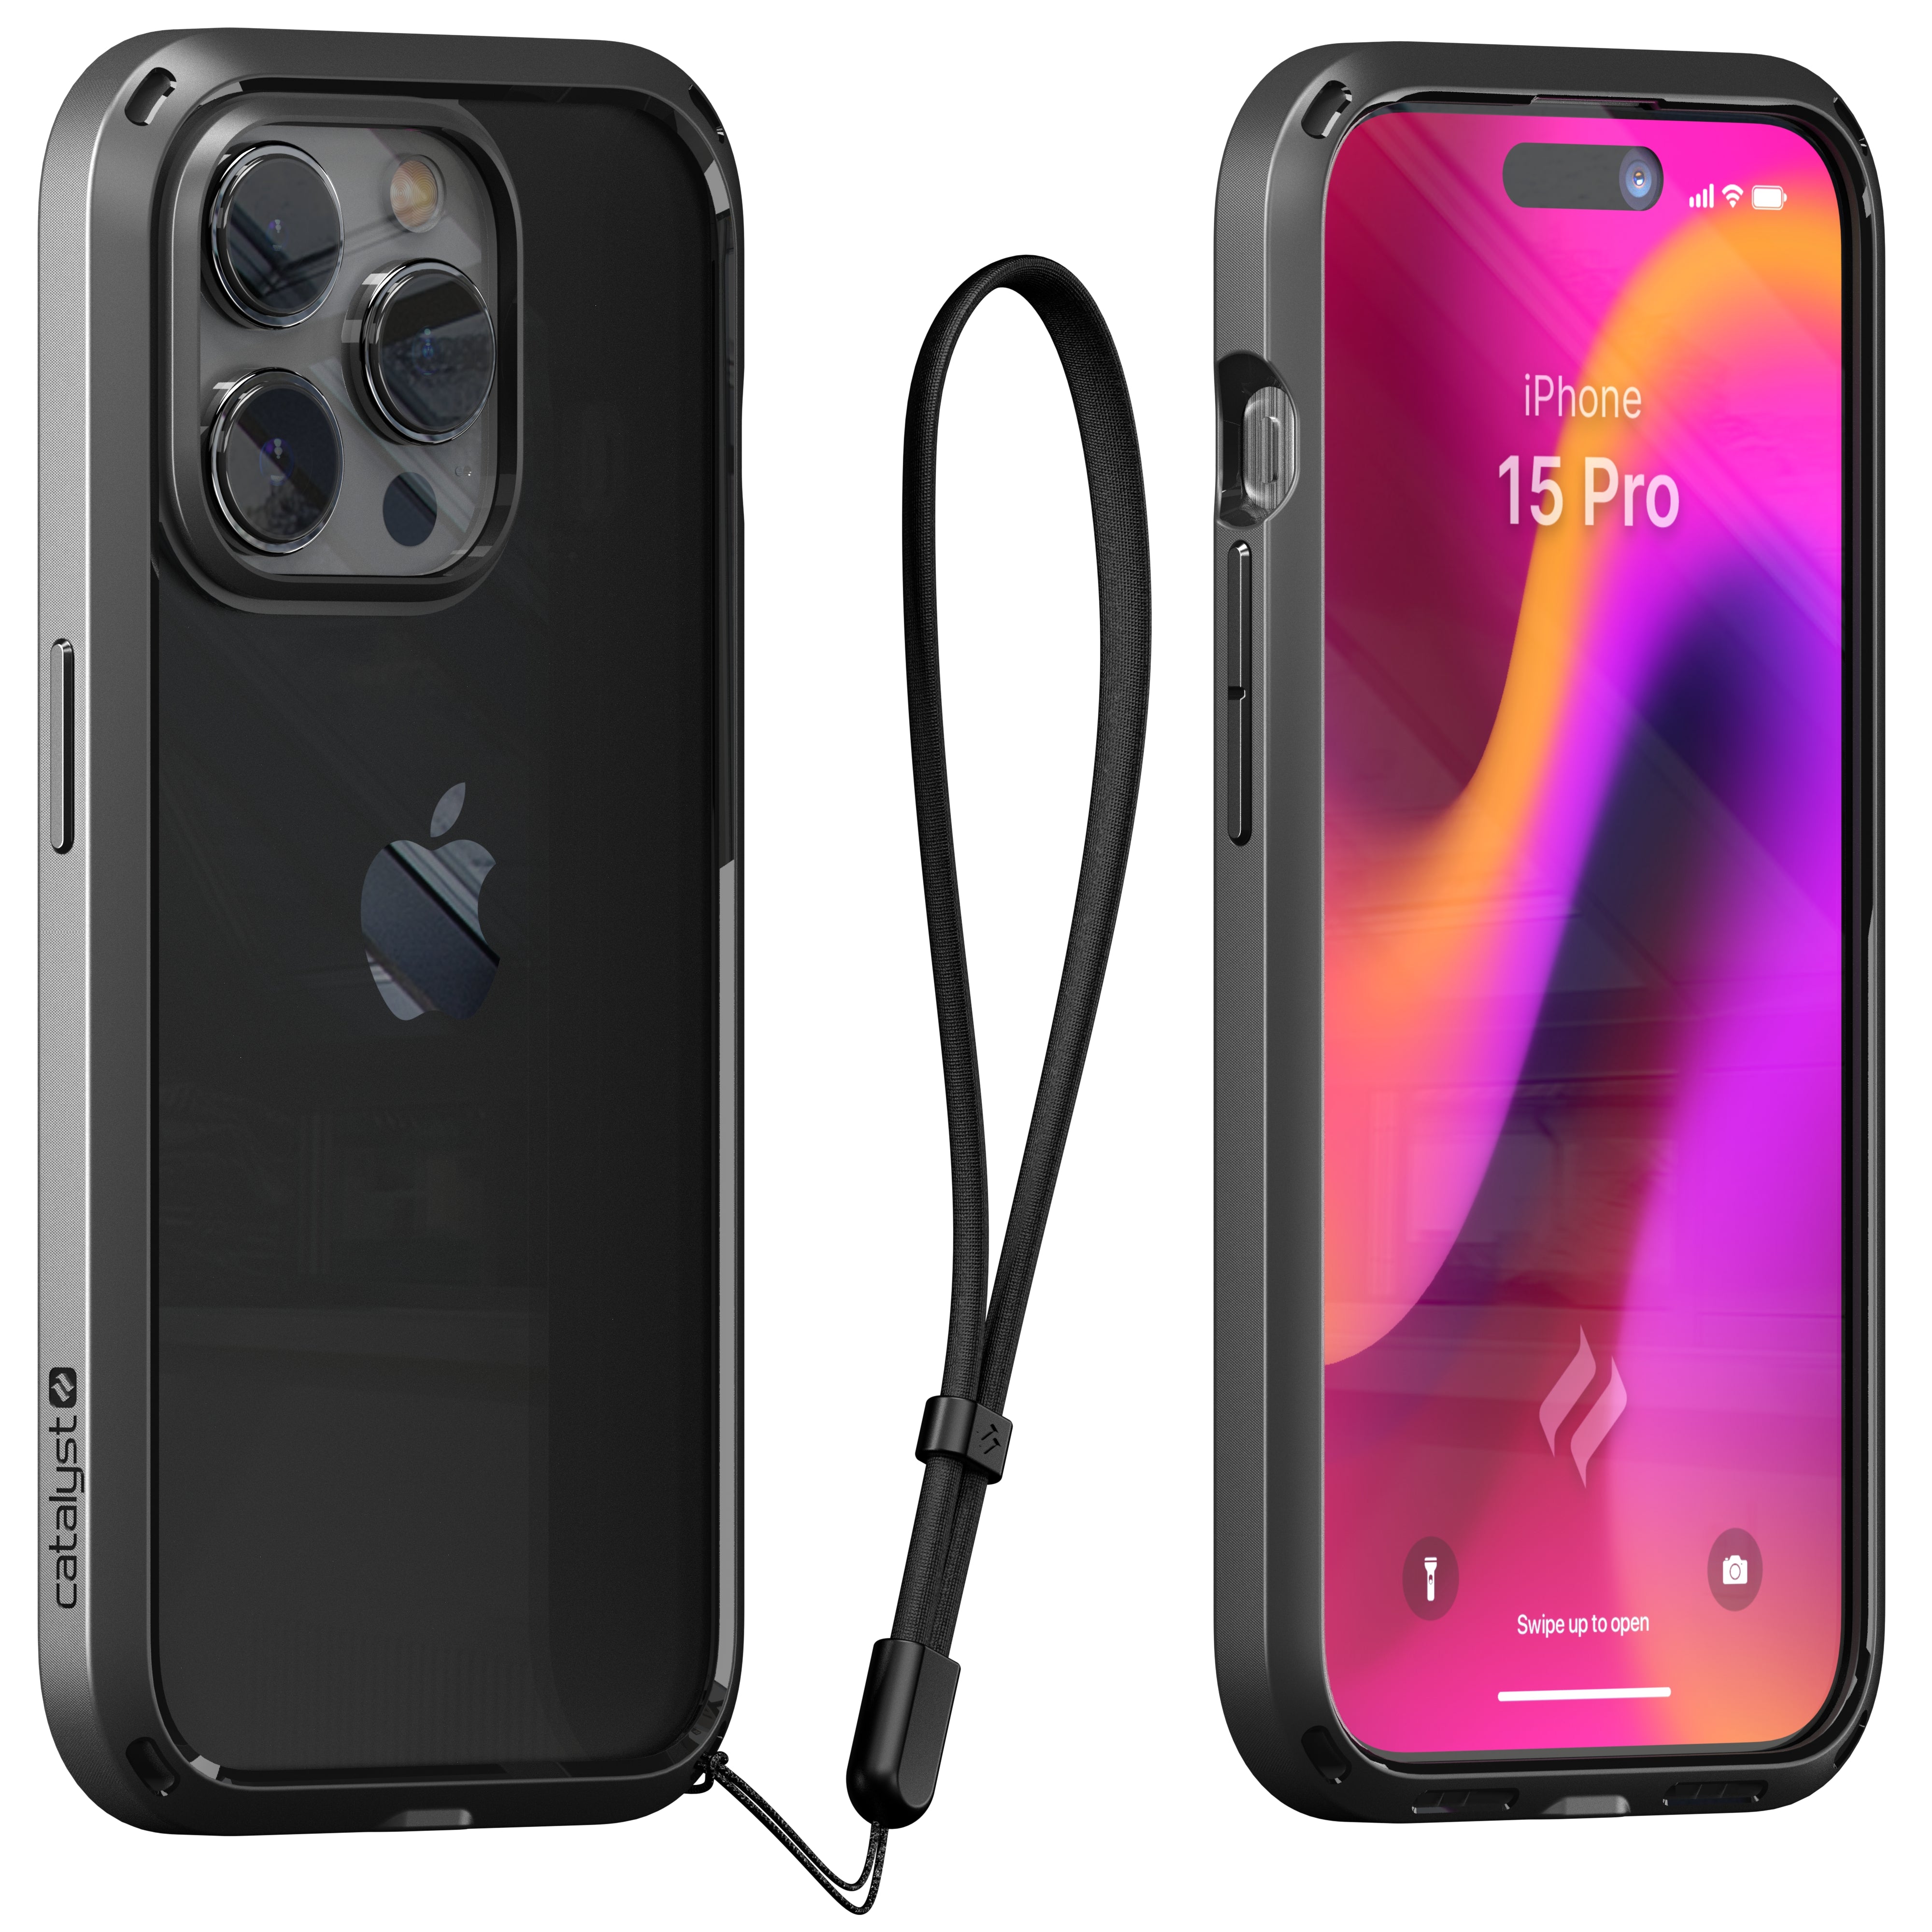 Catalyst iphone 15 series influence case iphone 15 pro in midnight black colorway showing the back and front view of the case with lanyard